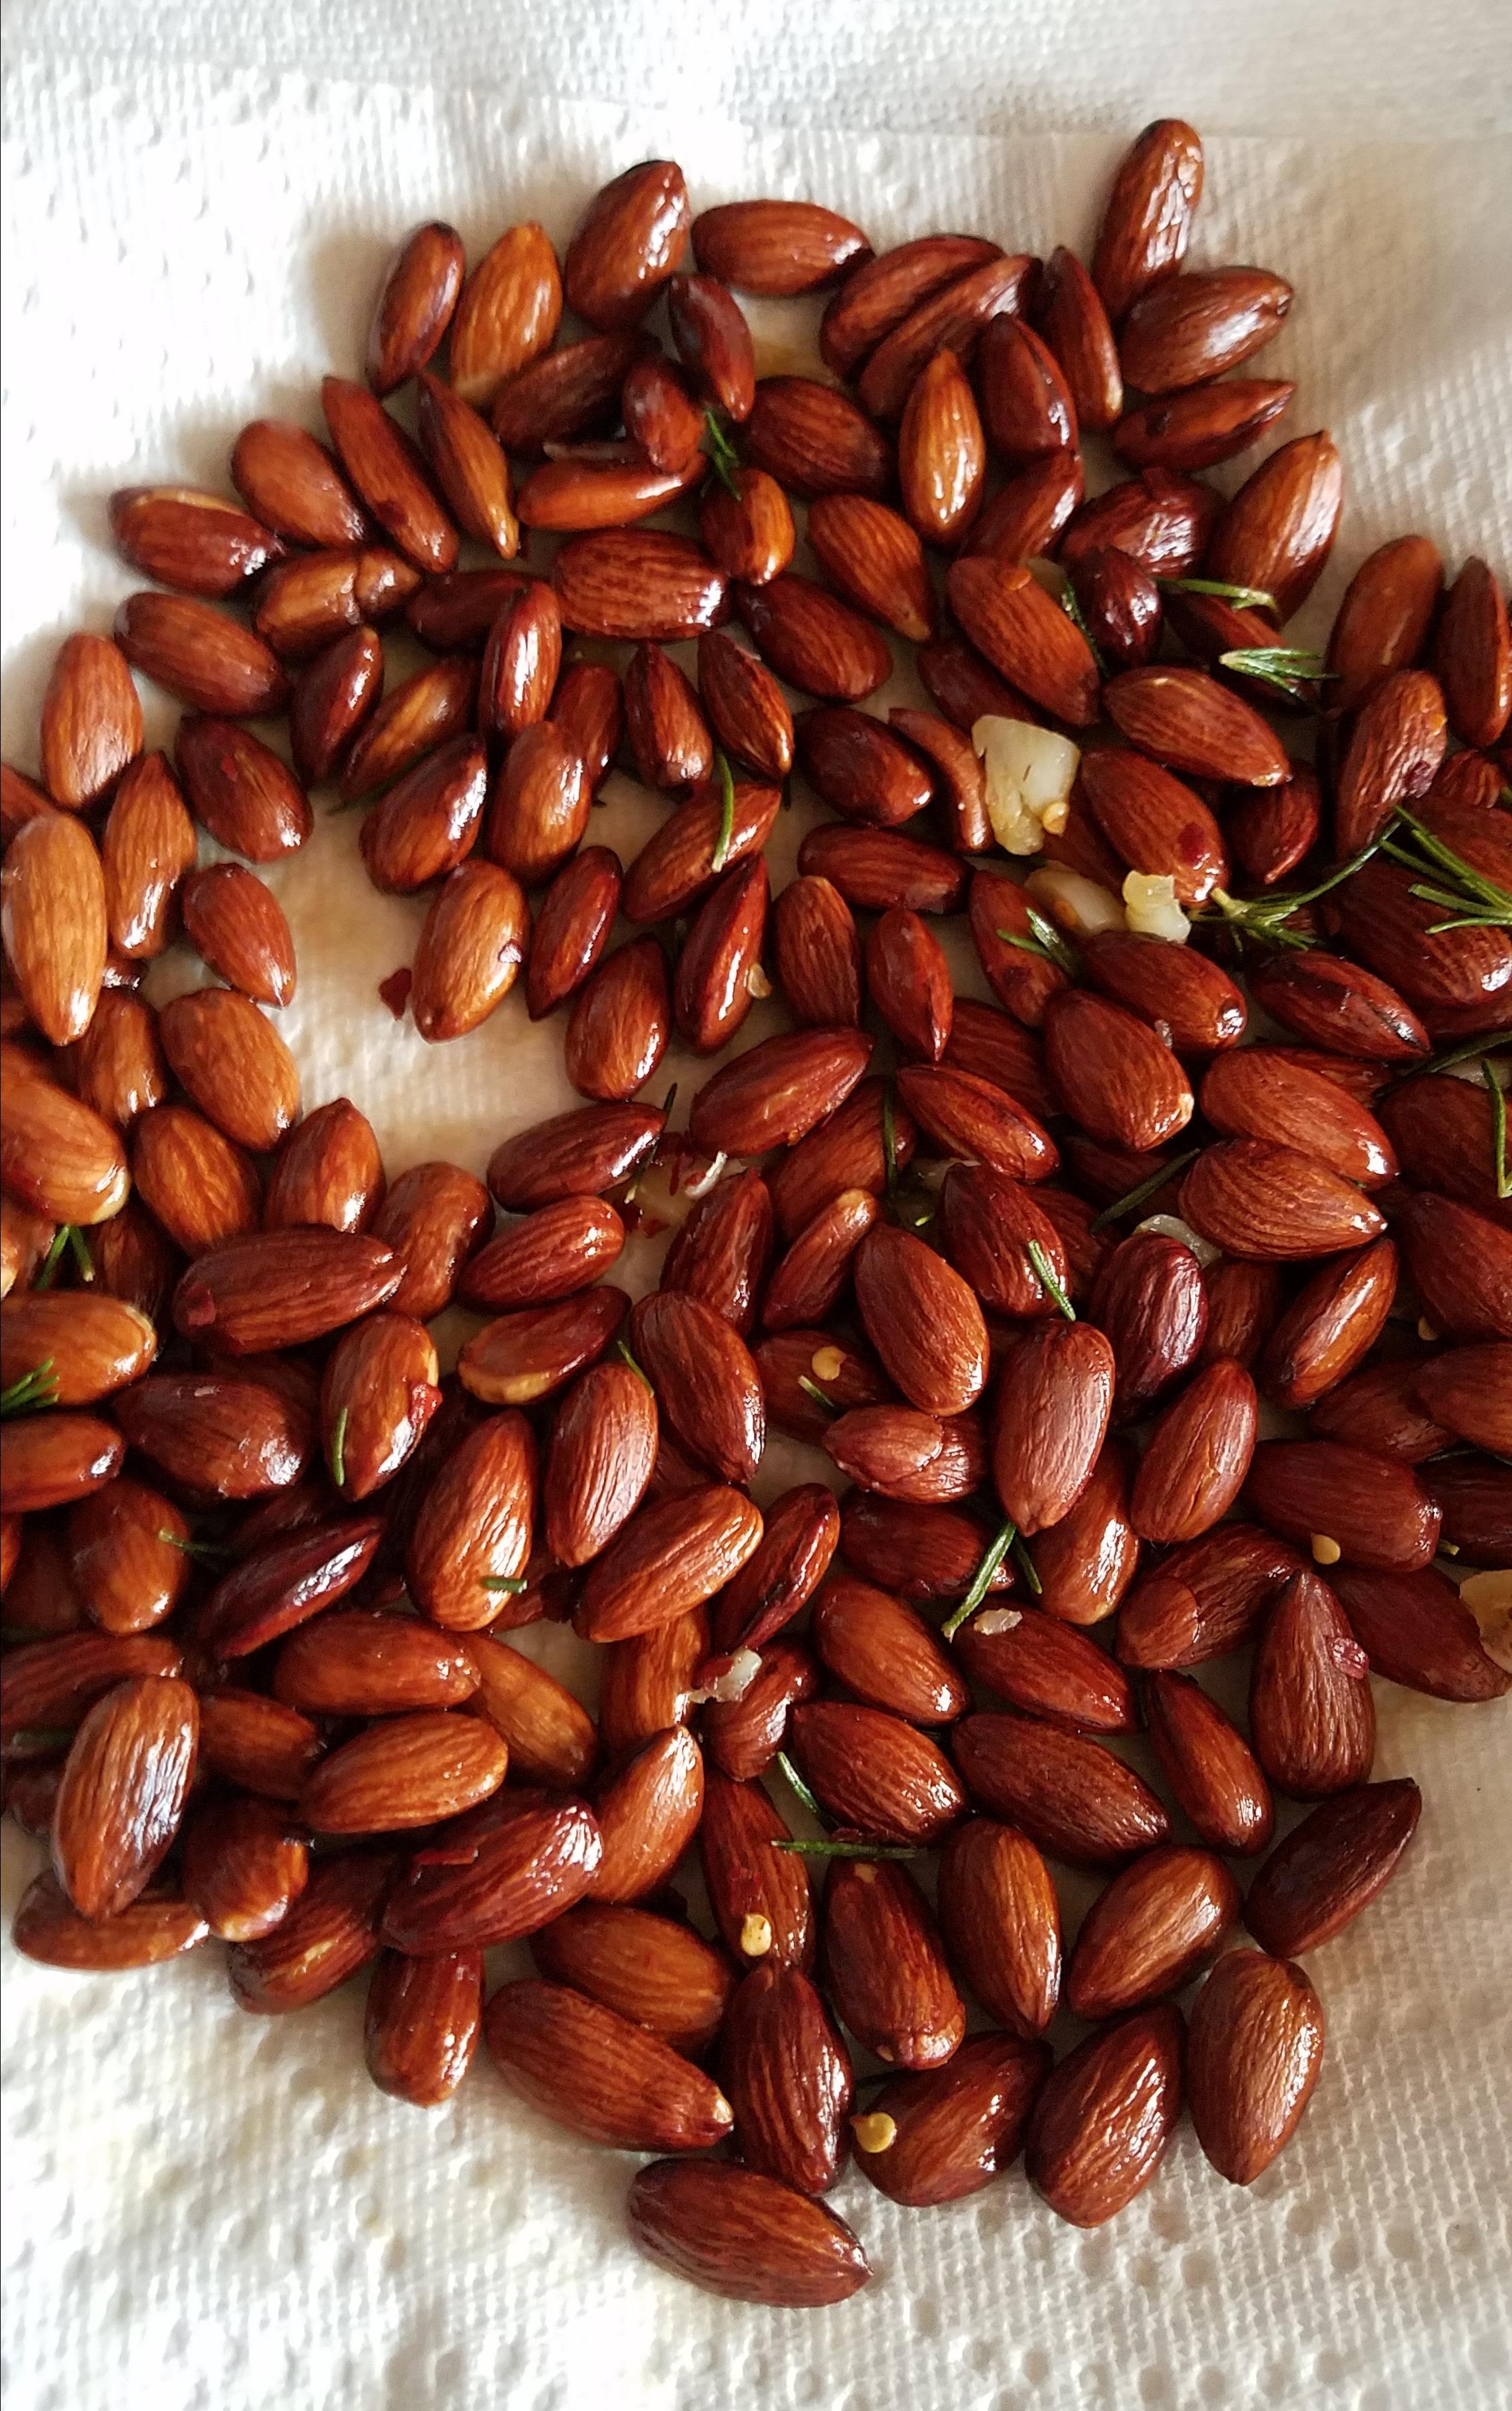 Rosemary and Garlic Infused Oven Roasted Almonds